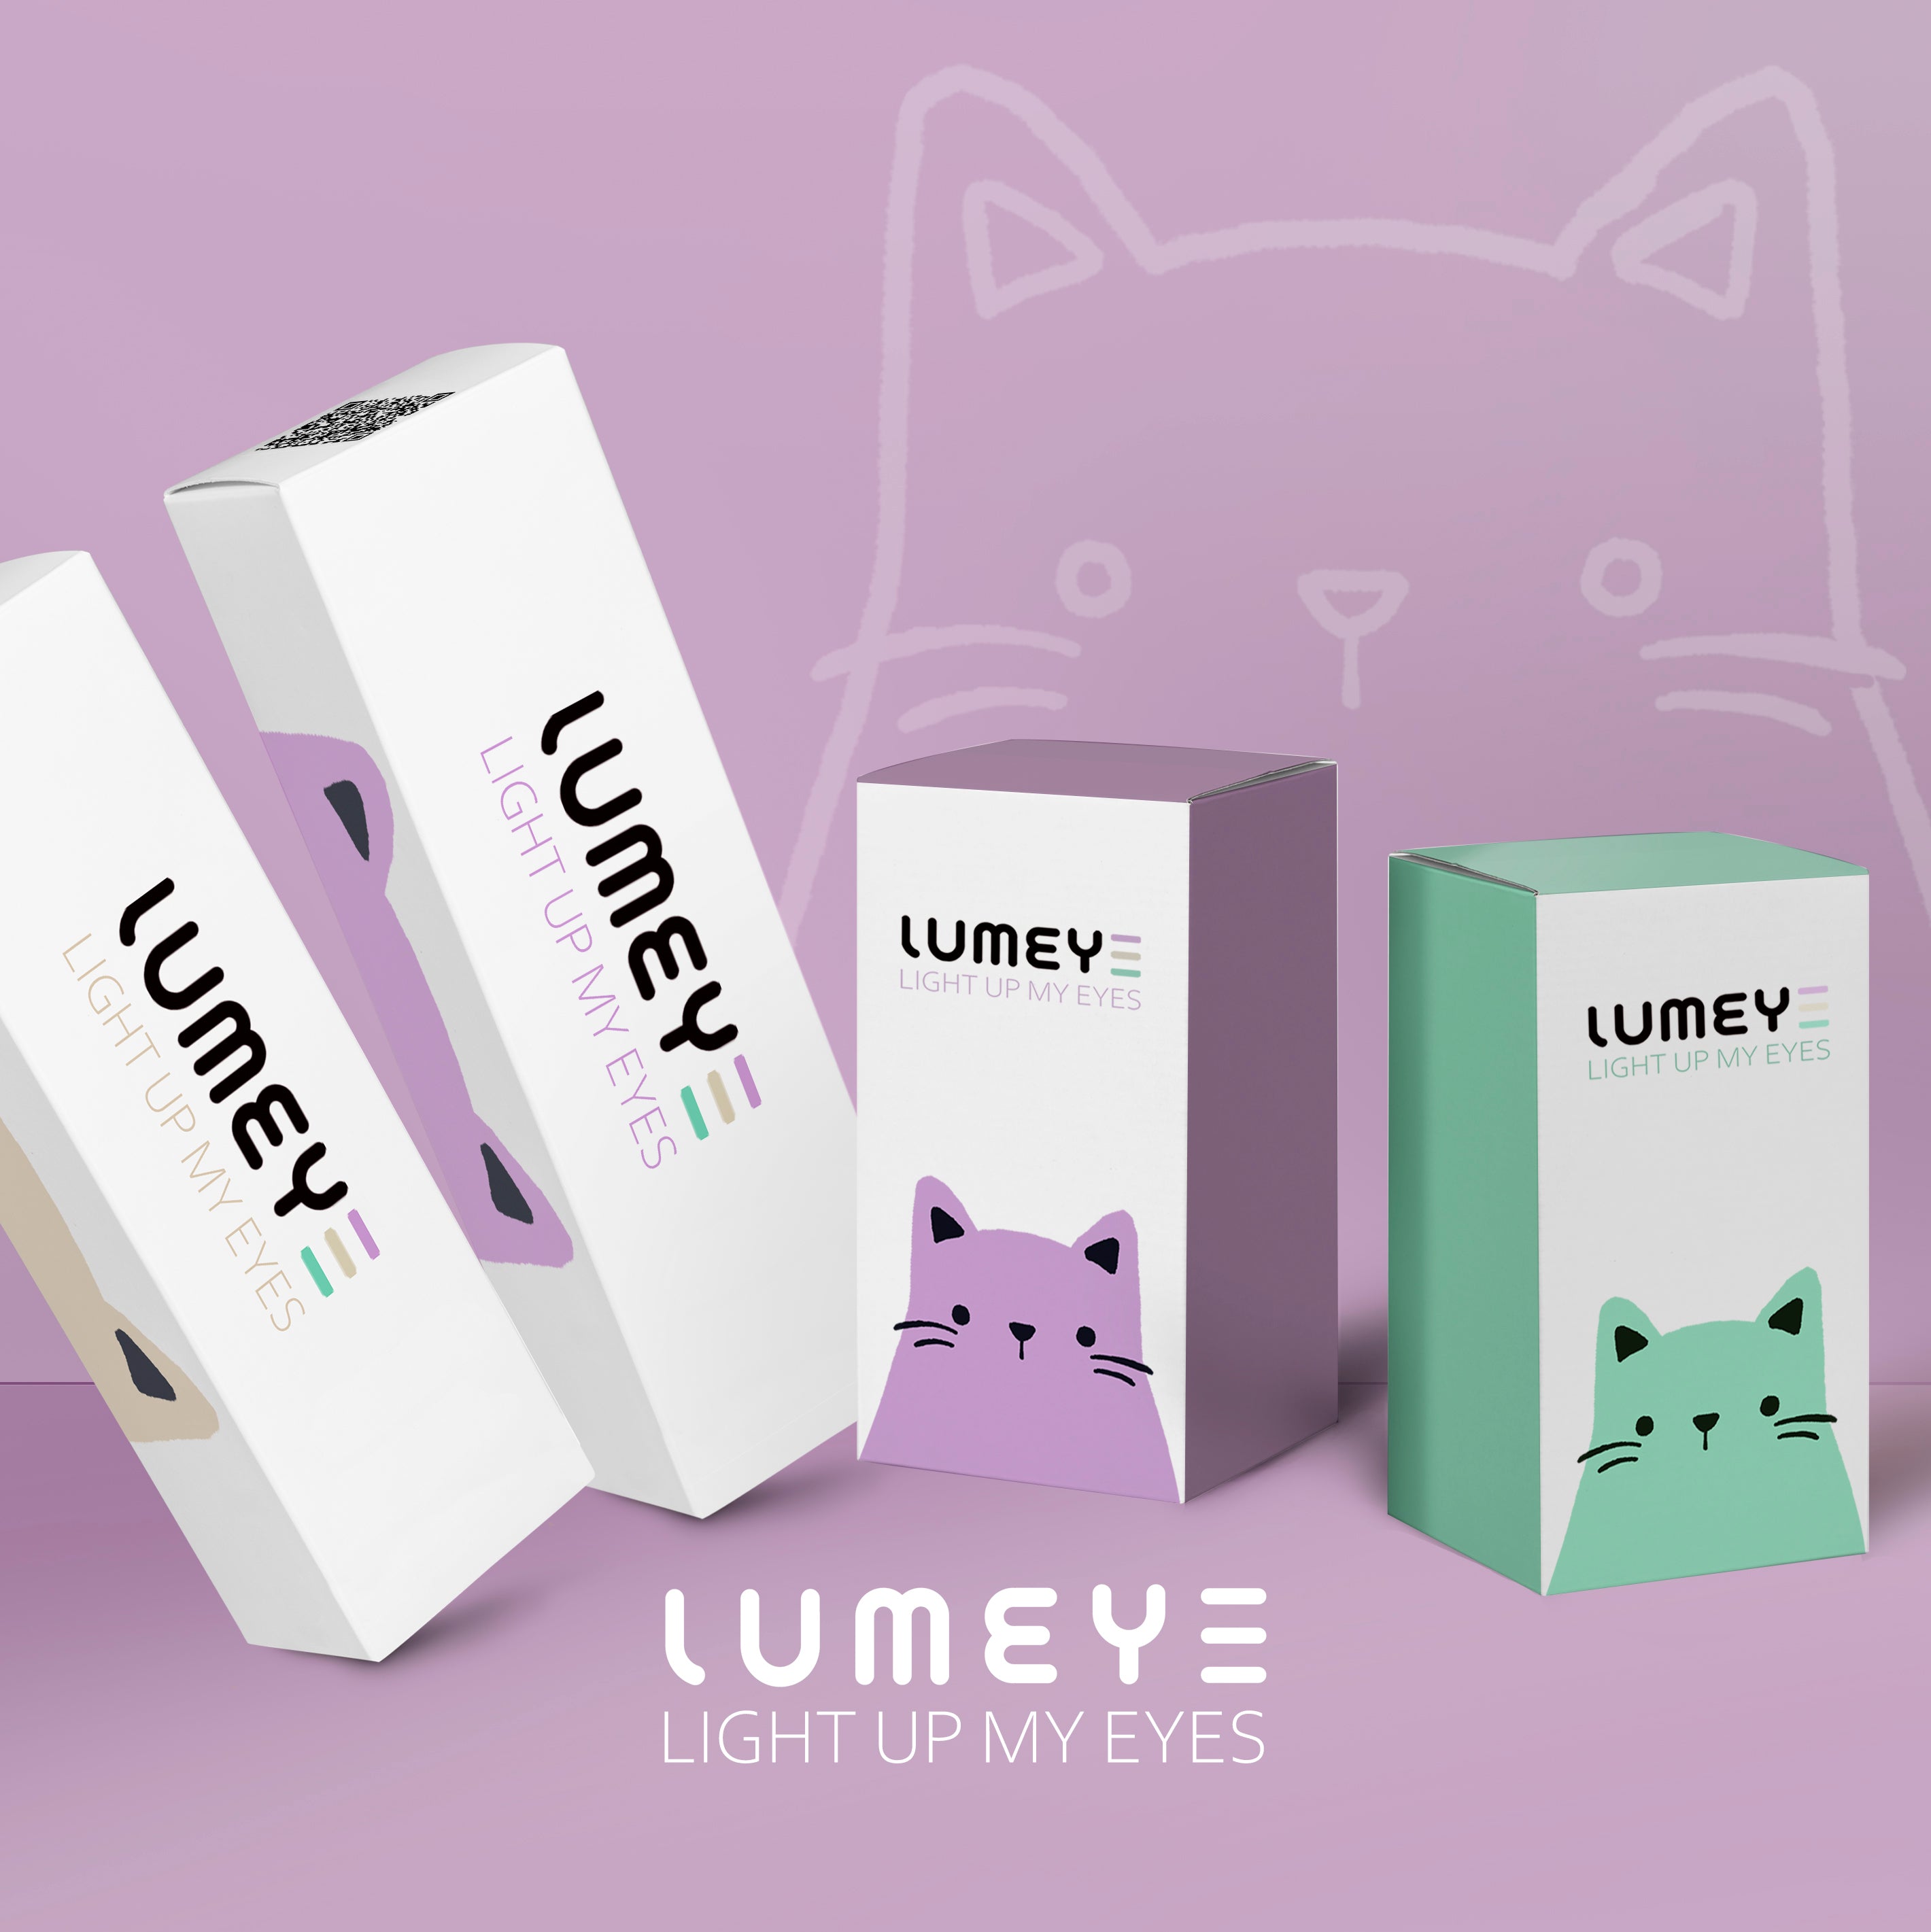 Best COLORED CONTACTS - LUMEYE Marble Gray Colored Contact Lenses - LUMEYE